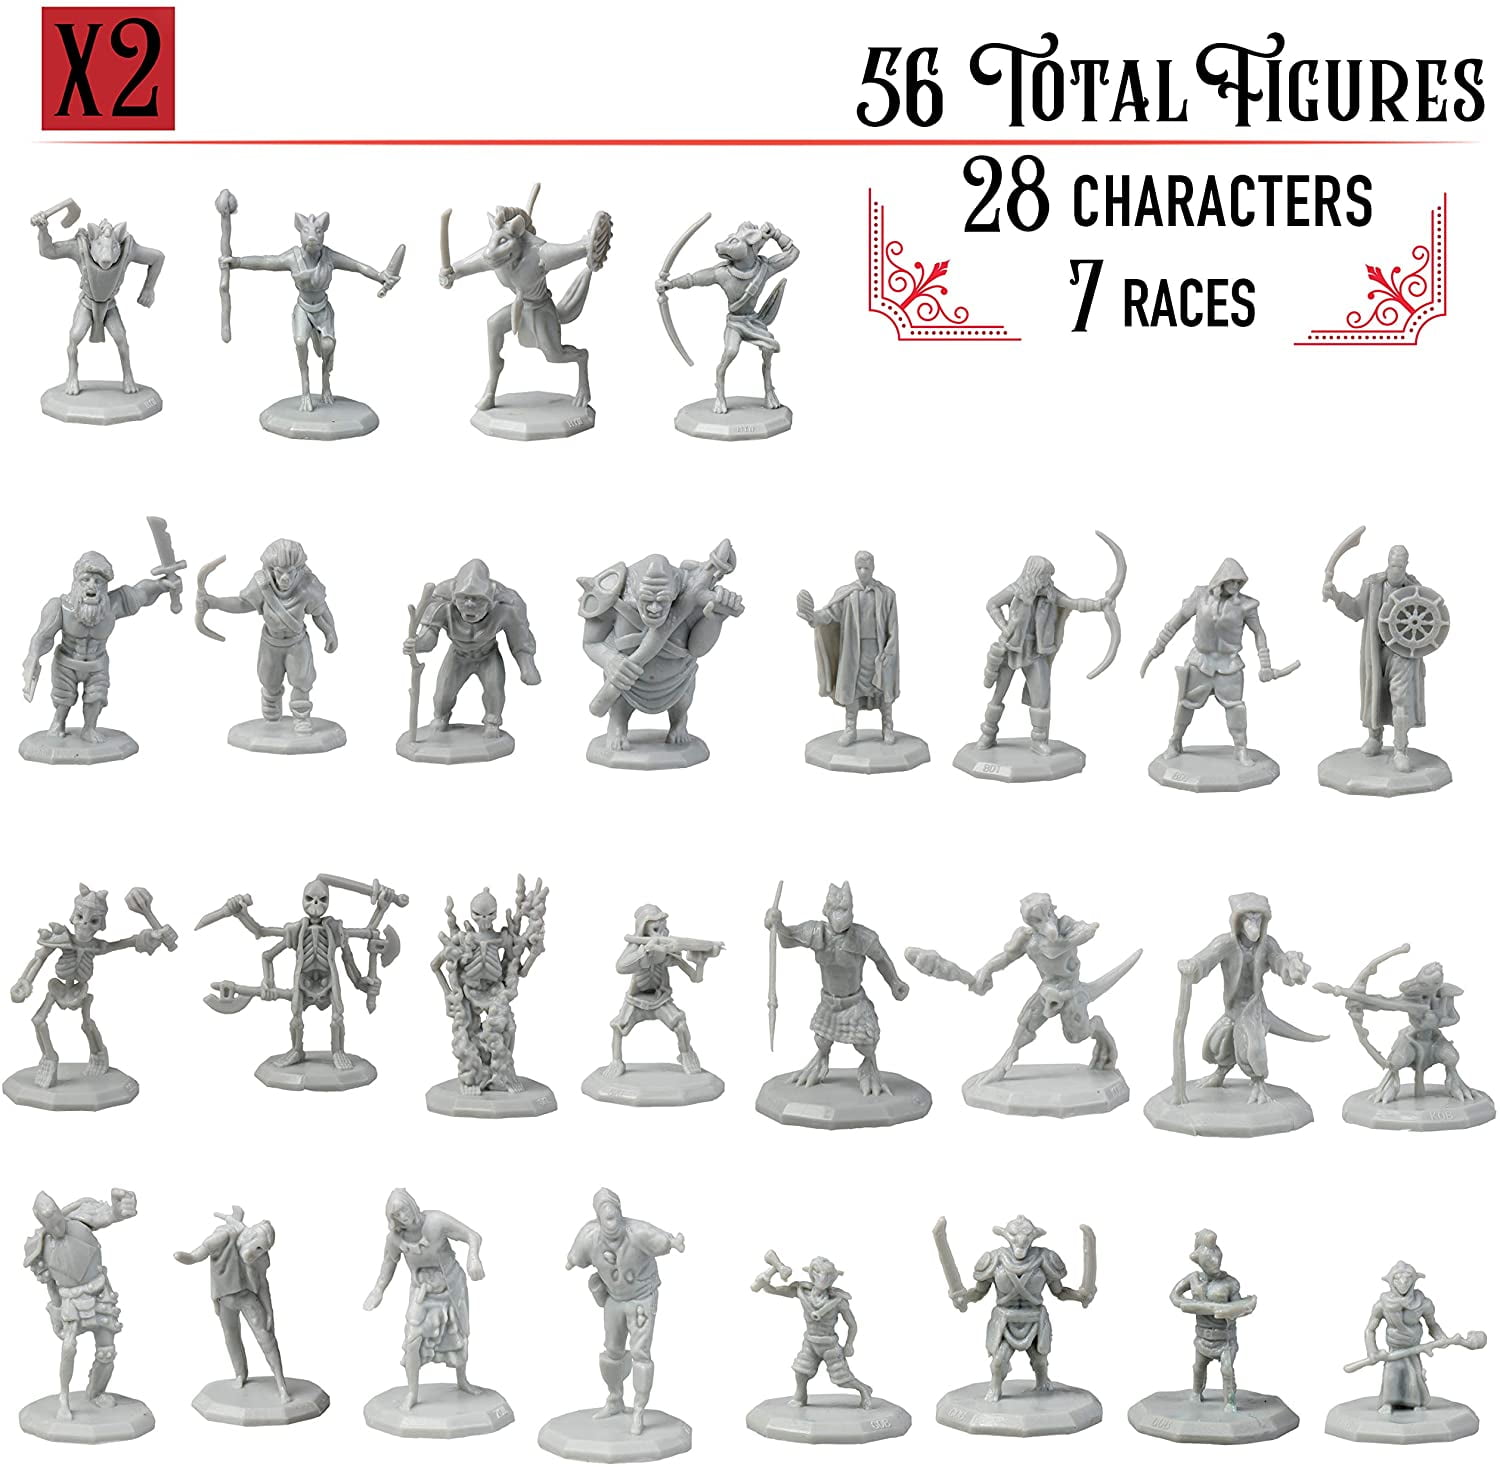 D&D Miniatures, 56 Mini Figures 1" Hexsized for Dungeons and Dragons